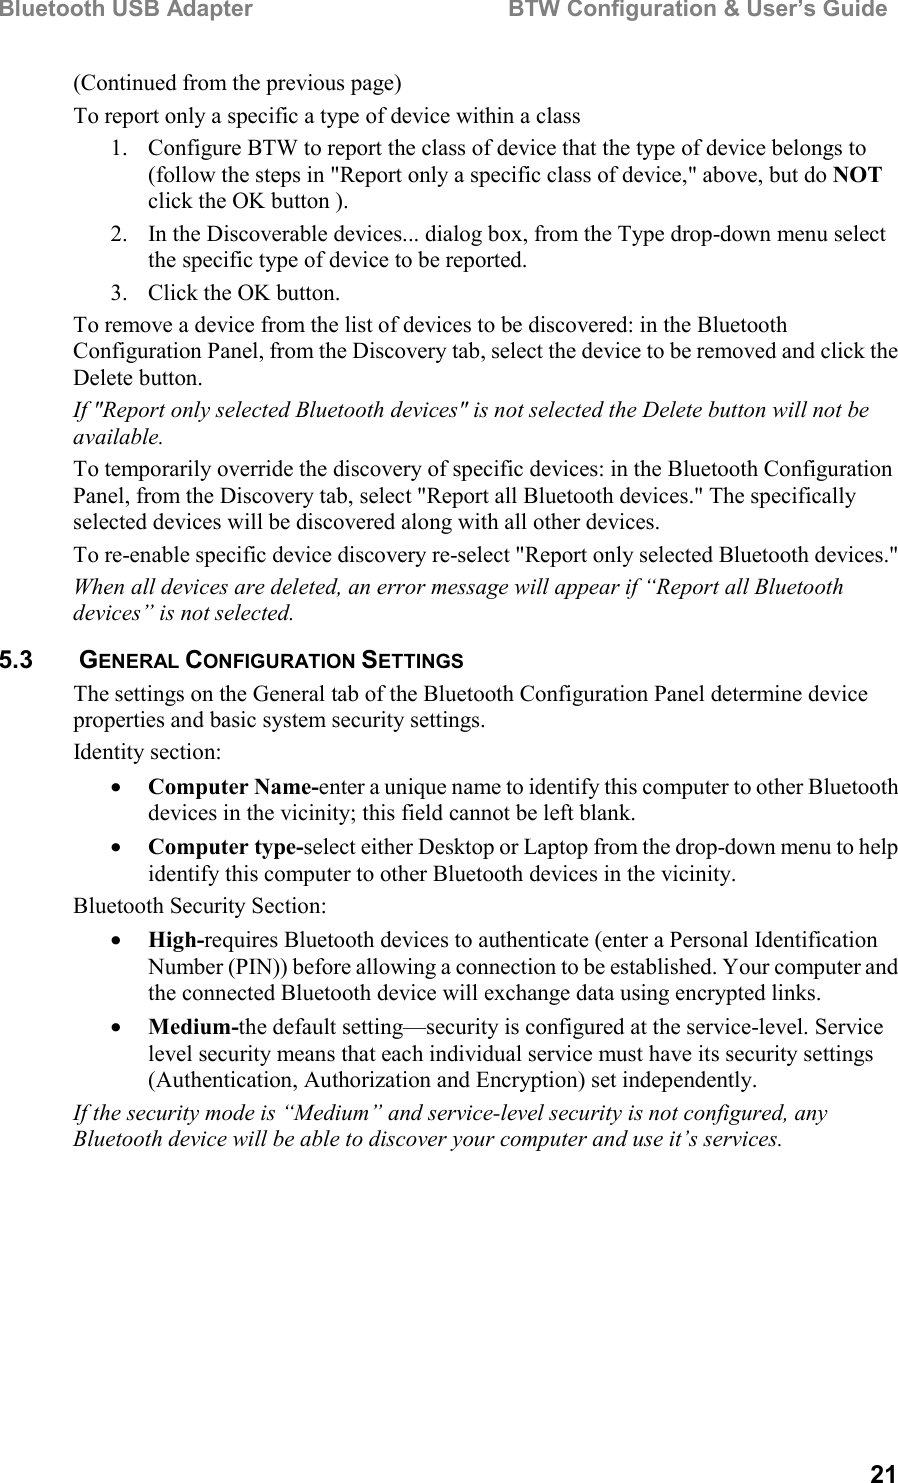 Bluetooth USB Adapter                                        BTW Configuration &amp; User’s Guide21(Continued from the previous page)To report only a specific a type of device within a class1. Configure BTW to report the class of device that the type of device belongs to(follow the steps in &quot;Report only a specific class of device,&quot; above, but do NOTclick the OK button ).2. In the Discoverable devices... dialog box, from the Type drop-down menu selectthe specific type of device to be reported.3. Click the OK button.To remove a device from the list of devices to be discovered: in the BluetoothConfiguration Panel, from the Discovery tab, select the device to be removed and click theDelete button.If &quot;Report only selected Bluetooth devices&quot; is not selected the Delete button will not beavailable.To temporarily override the discovery of specific devices: in the Bluetooth ConfigurationPanel, from the Discovery tab, select &quot;Report all Bluetooth devices.&quot; The specificallyselected devices will be discovered along with all other devices.To re-enable specific device discovery re-select &quot;Report only selected Bluetooth devices.&quot;When all devices are deleted, an error message will appear if “Report all Bluetoothdevices” is not selected.5.3   GENERAL CONFIGURATION SETTINGSThe settings on the General tab of the Bluetooth Configuration Panel determine deviceproperties and basic system security settings.Identity section:• Computer Name-enter a unique name to identify this computer to other Bluetoothdevices in the vicinity; this field cannot be left blank.• Computer type-select either Desktop or Laptop from the drop-down menu to helpidentify this computer to other Bluetooth devices in the vicinity.Bluetooth Security Section:• High-requires Bluetooth devices to authenticate (enter a Personal IdentificationNumber (PIN)) before allowing a connection to be established. Your computer andthe connected Bluetooth device will exchange data using encrypted links.• Medium-the default setting—security is configured at the service-level. Servicelevel security means that each individual service must have its security settings(Authentication, Authorization and Encryption) set independently.If the security mode is “Medium” and service-level security is not configured, anyBluetooth device will be able to discover your computer and use it’s services.